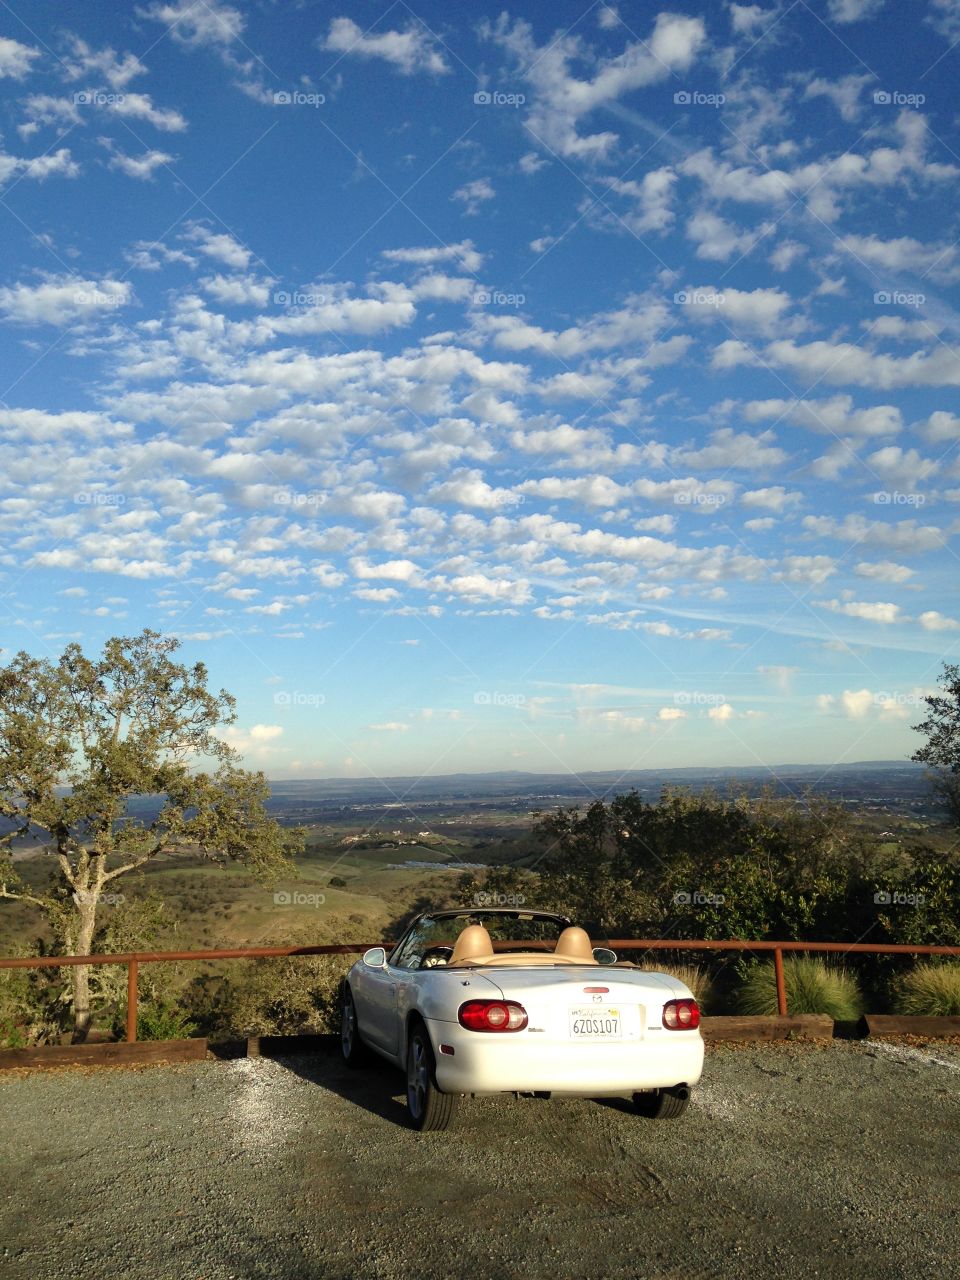 Overlook. Convertible car looking out over a valley